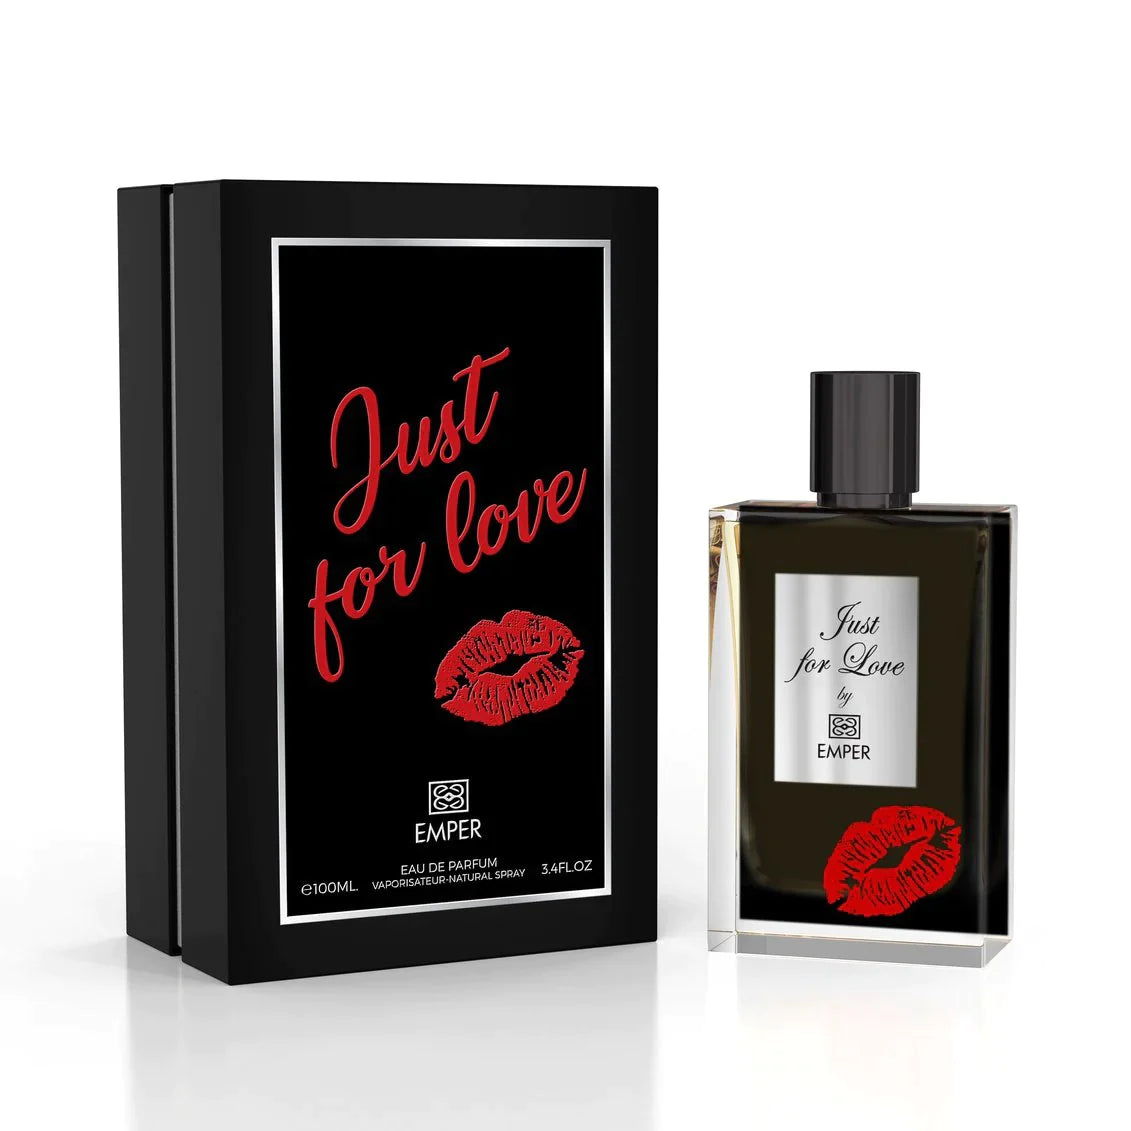 JUST FOR LOVE 3.4 OZ / 100 ML EDP